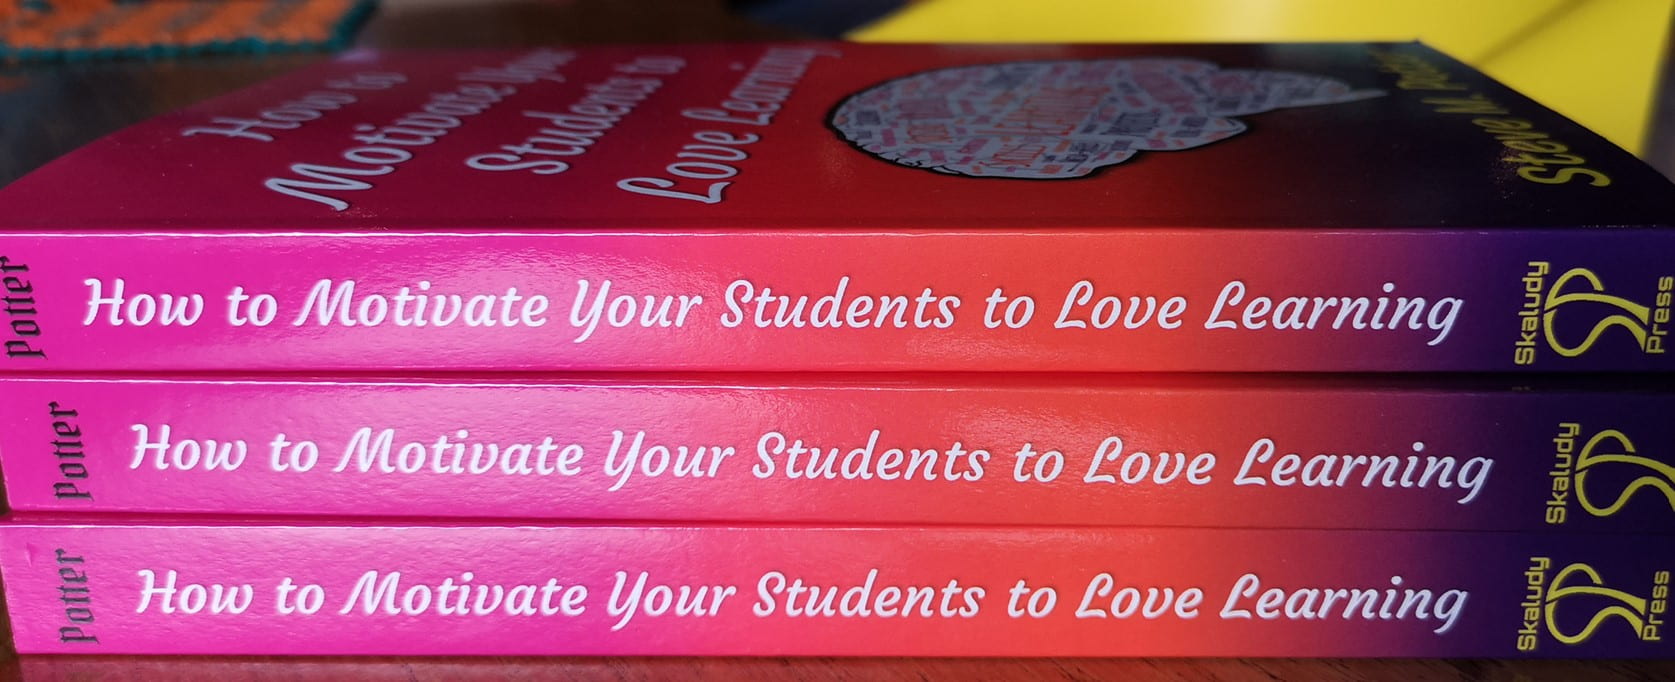 How to Motivate Your Students to Love Learning